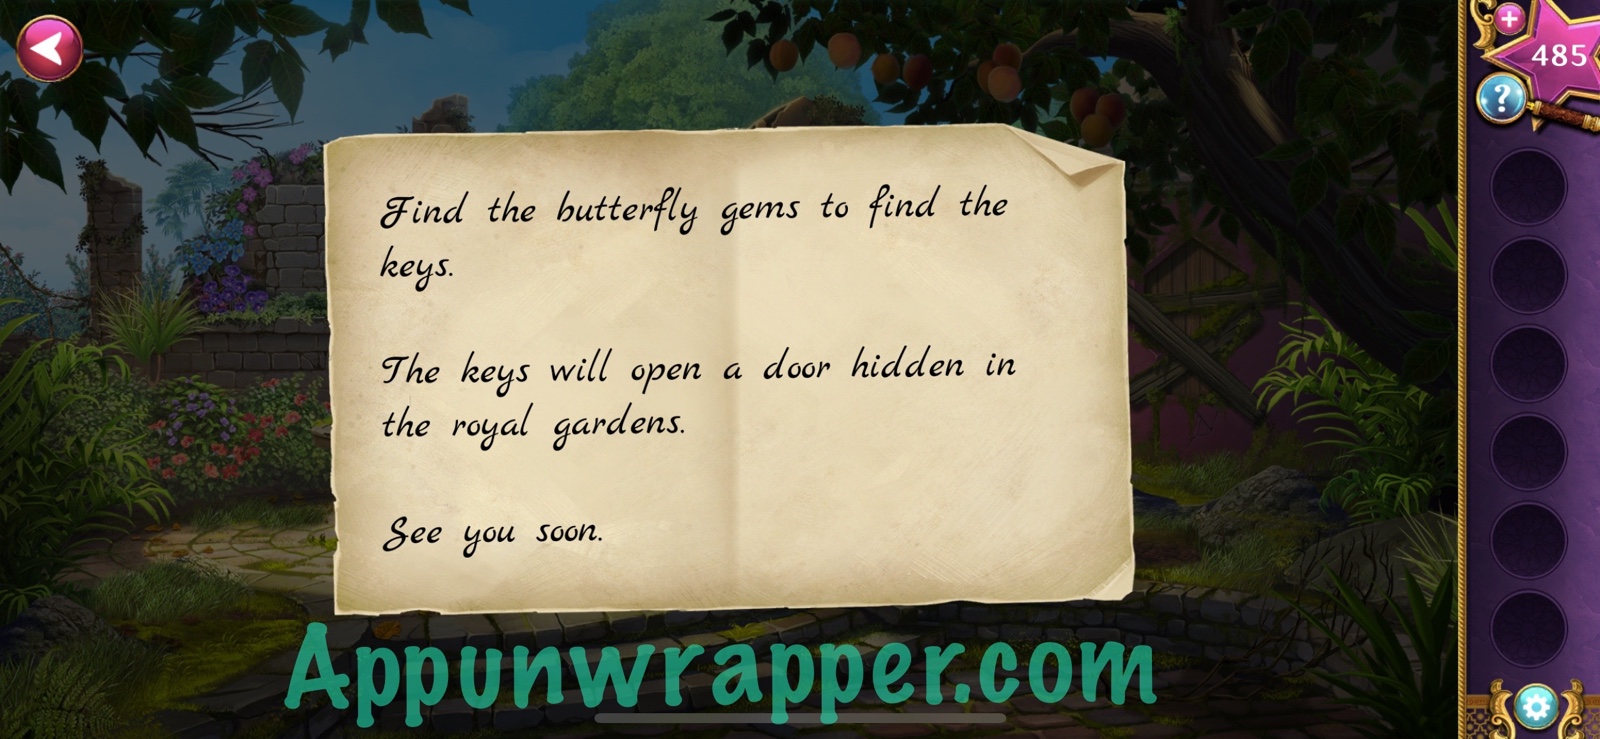 answer key for butterfly escape game